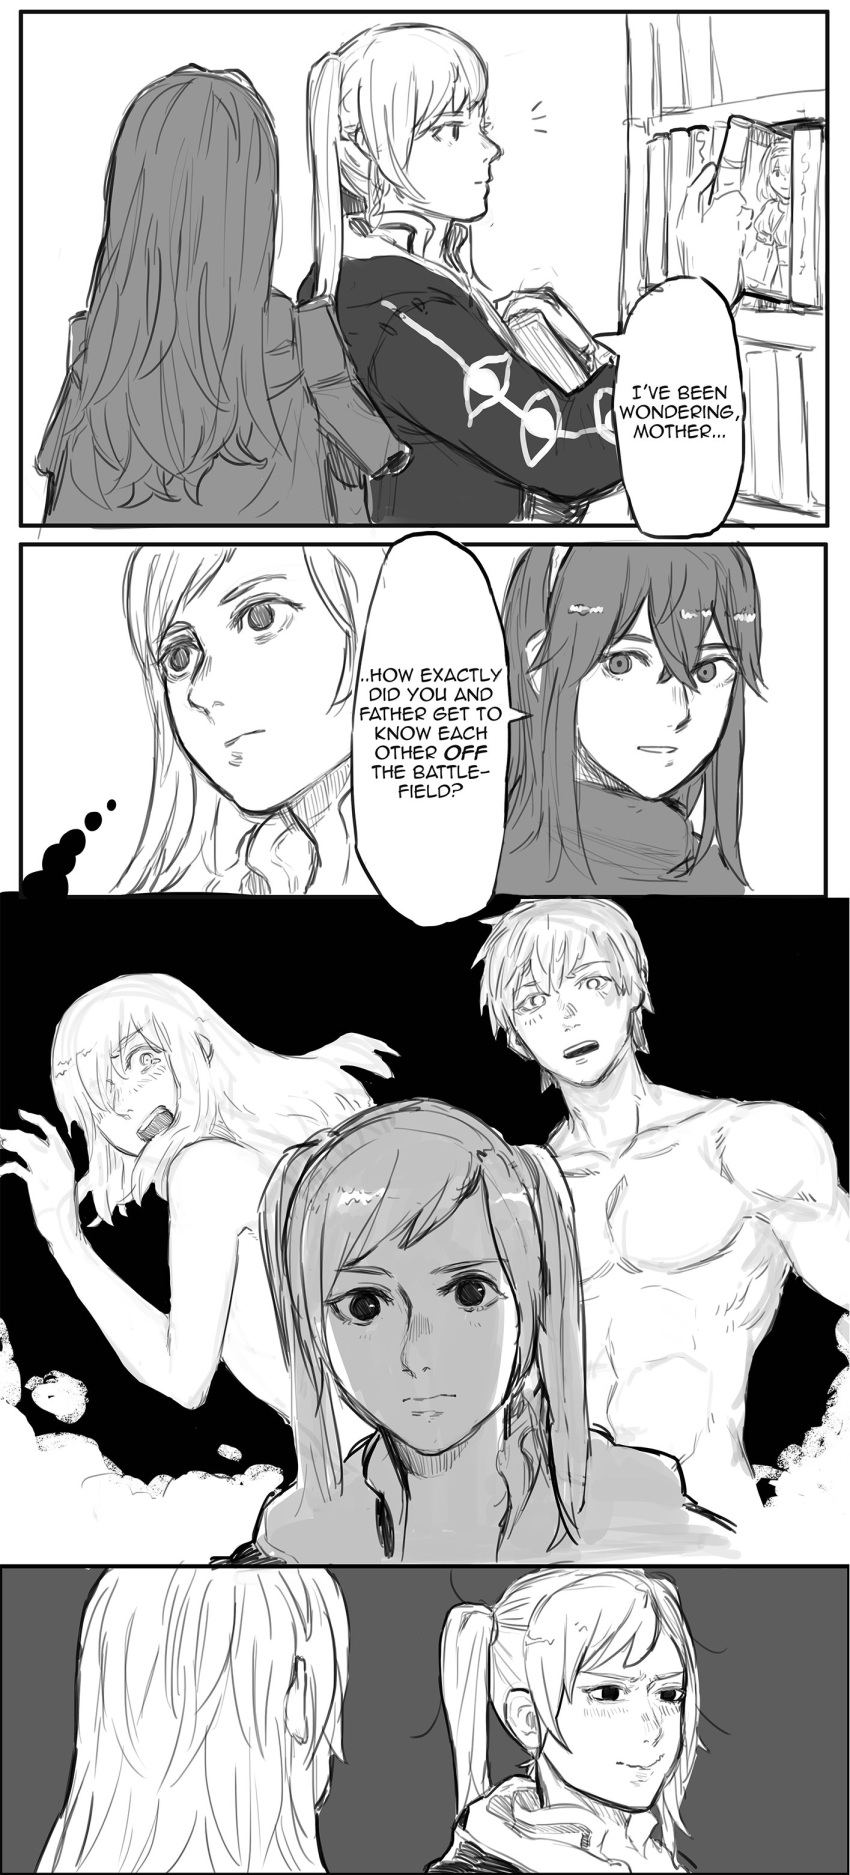 2girls absurdres bangs blush caught comic english_text female_my_unit_(fire_emblem:_kakusei) fire_emblem fire_emblem:_kakusei greyscale hair_between_eyes hairband highres imagining krom long_hair lucina monochrome mother_and_daughter multiple_girls muscle my_unit_(fire_emblem:_kakusei) nintendo nude short_hair swept_bangs tagme twintails yrfreakyneighbr